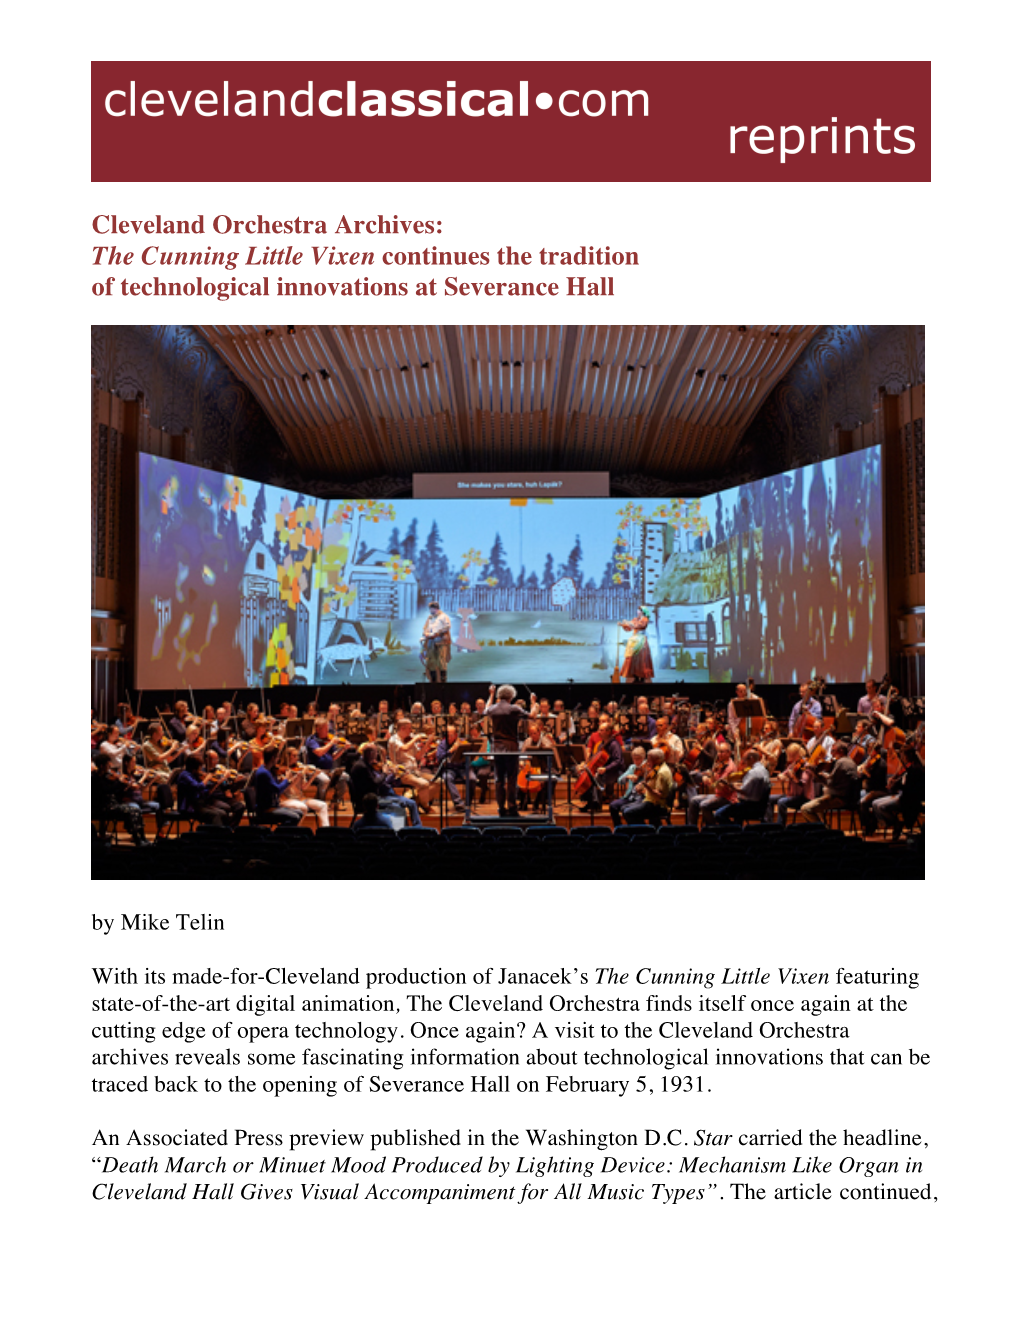 Cleveland Orchestra Archives: the Cunning Little Vixen Continues the Tradition of Technological Innovations at Severance Hall